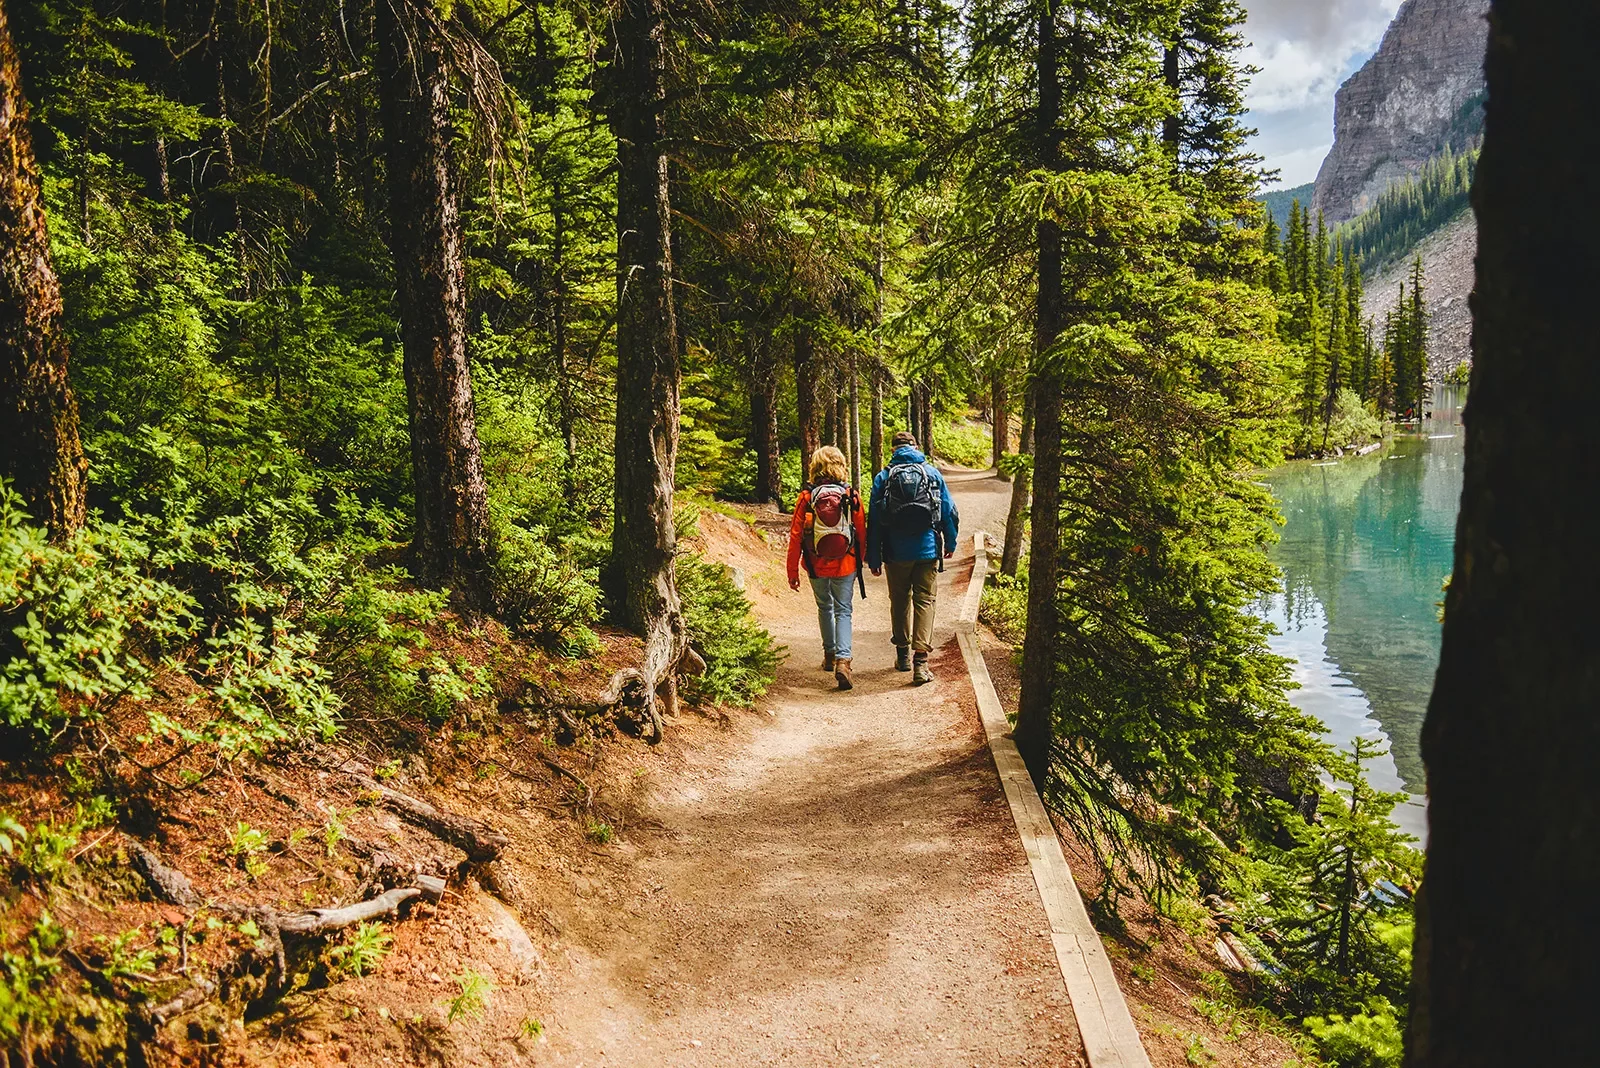 Two guests hiking down forest trail, river or lake to their right.